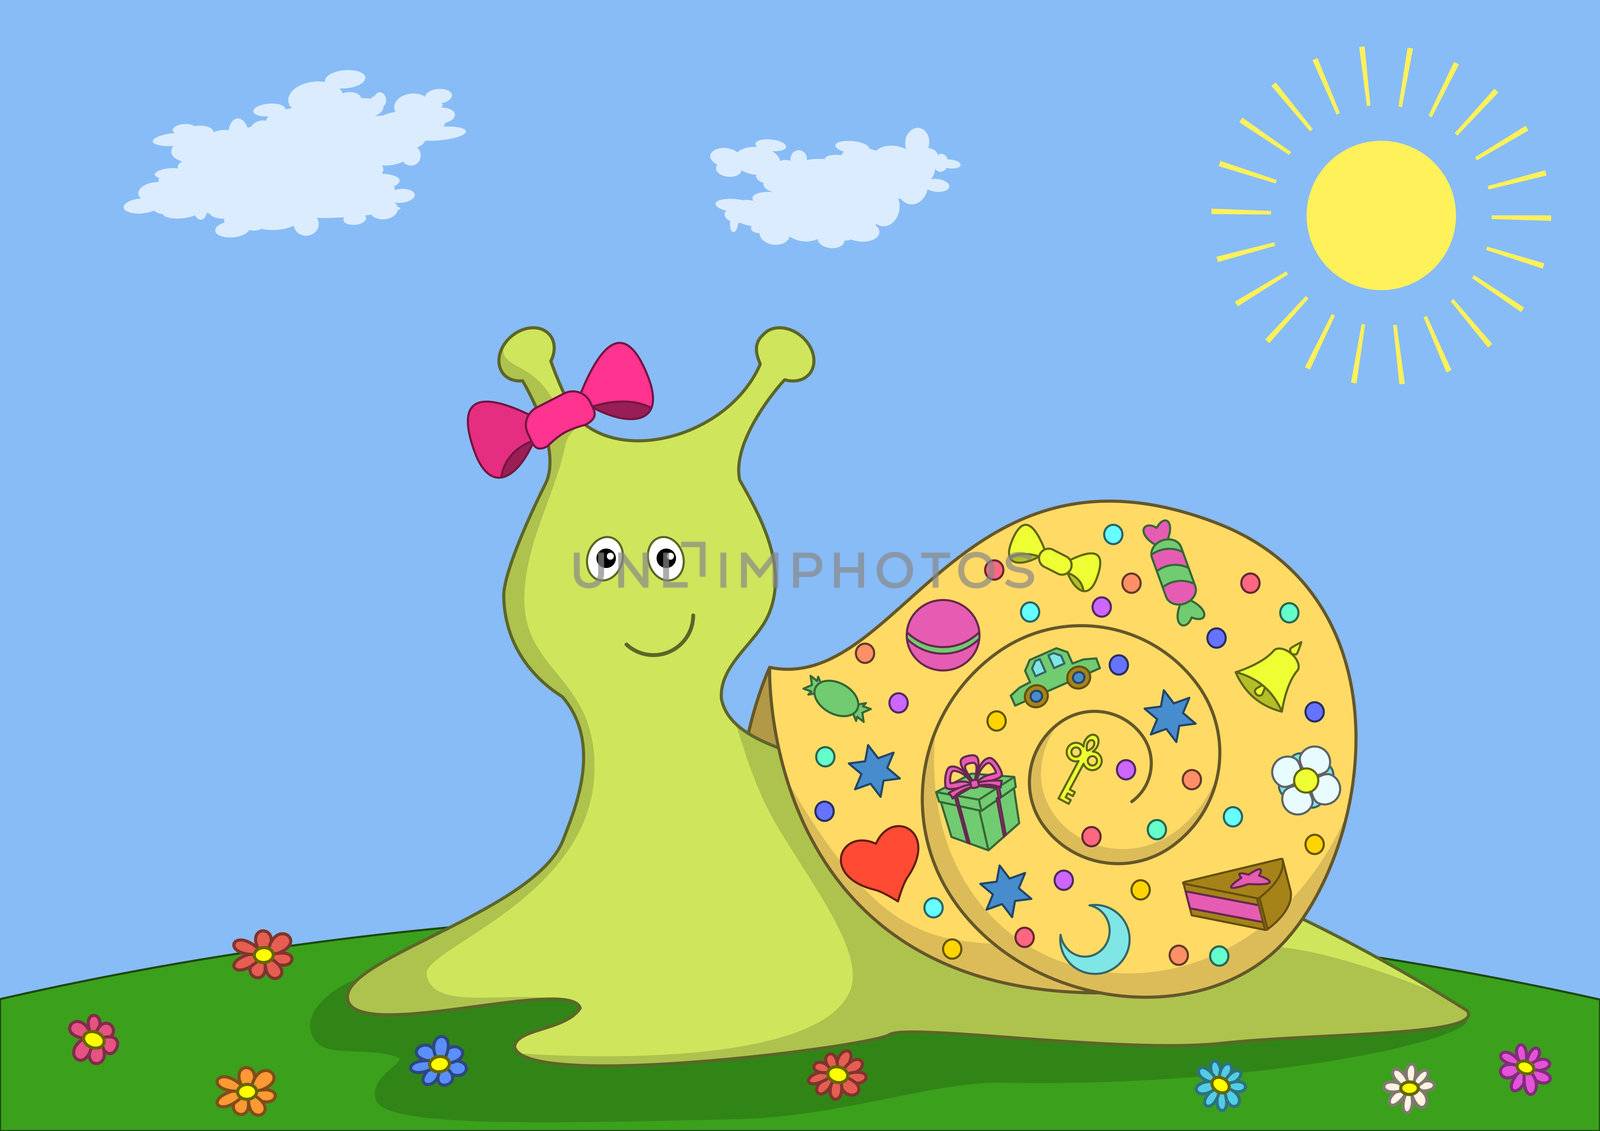 Smiling snail creeps on green meadow, carrying someone gifts on its bowl